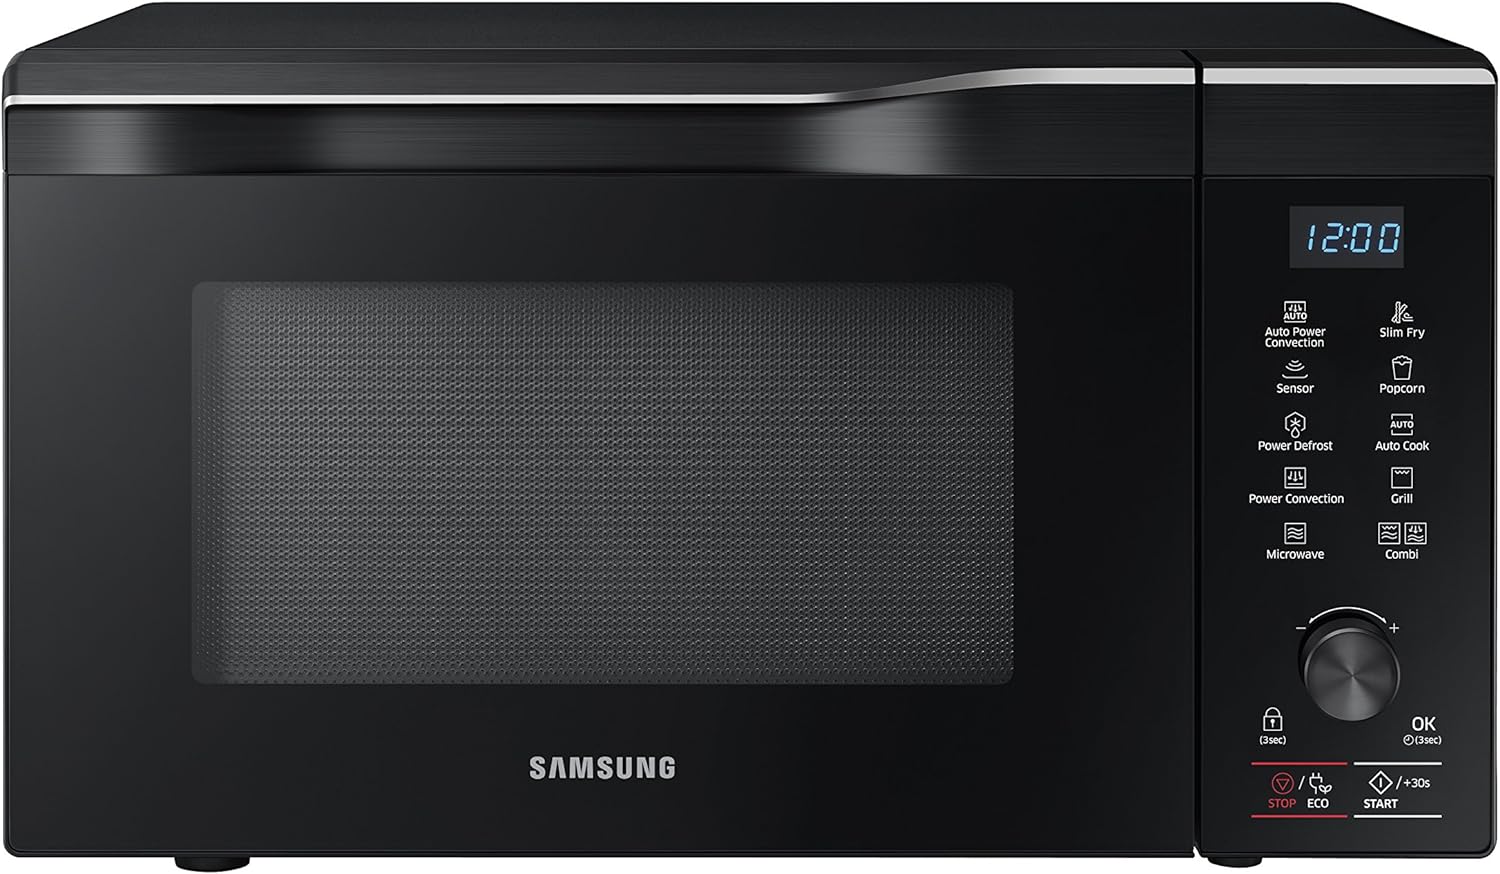 SAMSUNG 1.1 Cu Ft Power Grill Countertop Microwave Oven